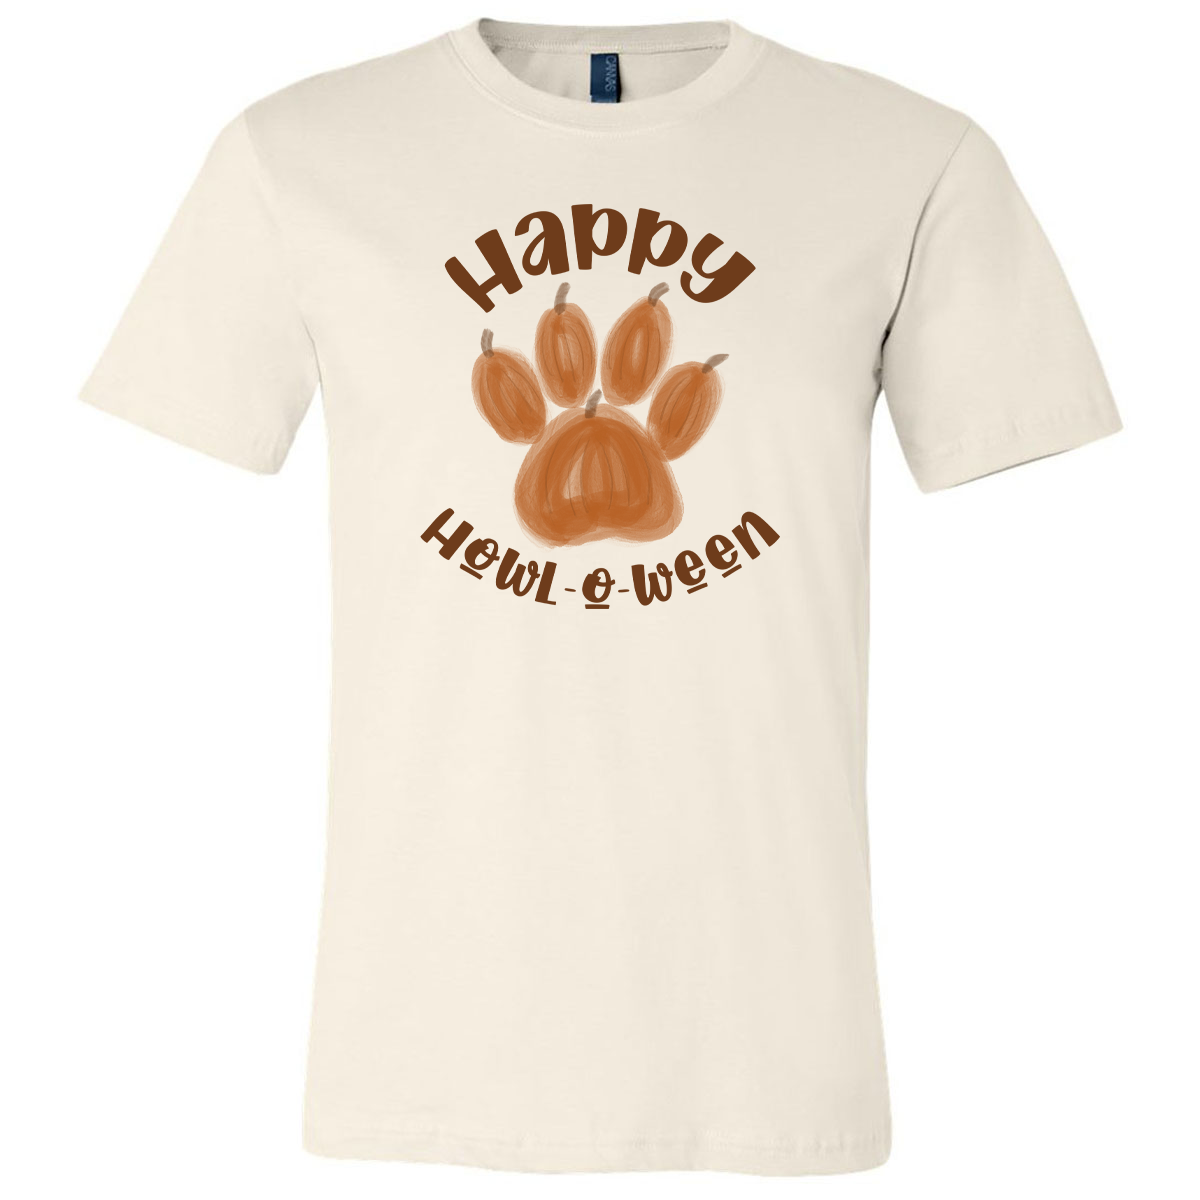 Happy Howl-O-ween Tee - Natural - Southern Grace Creations